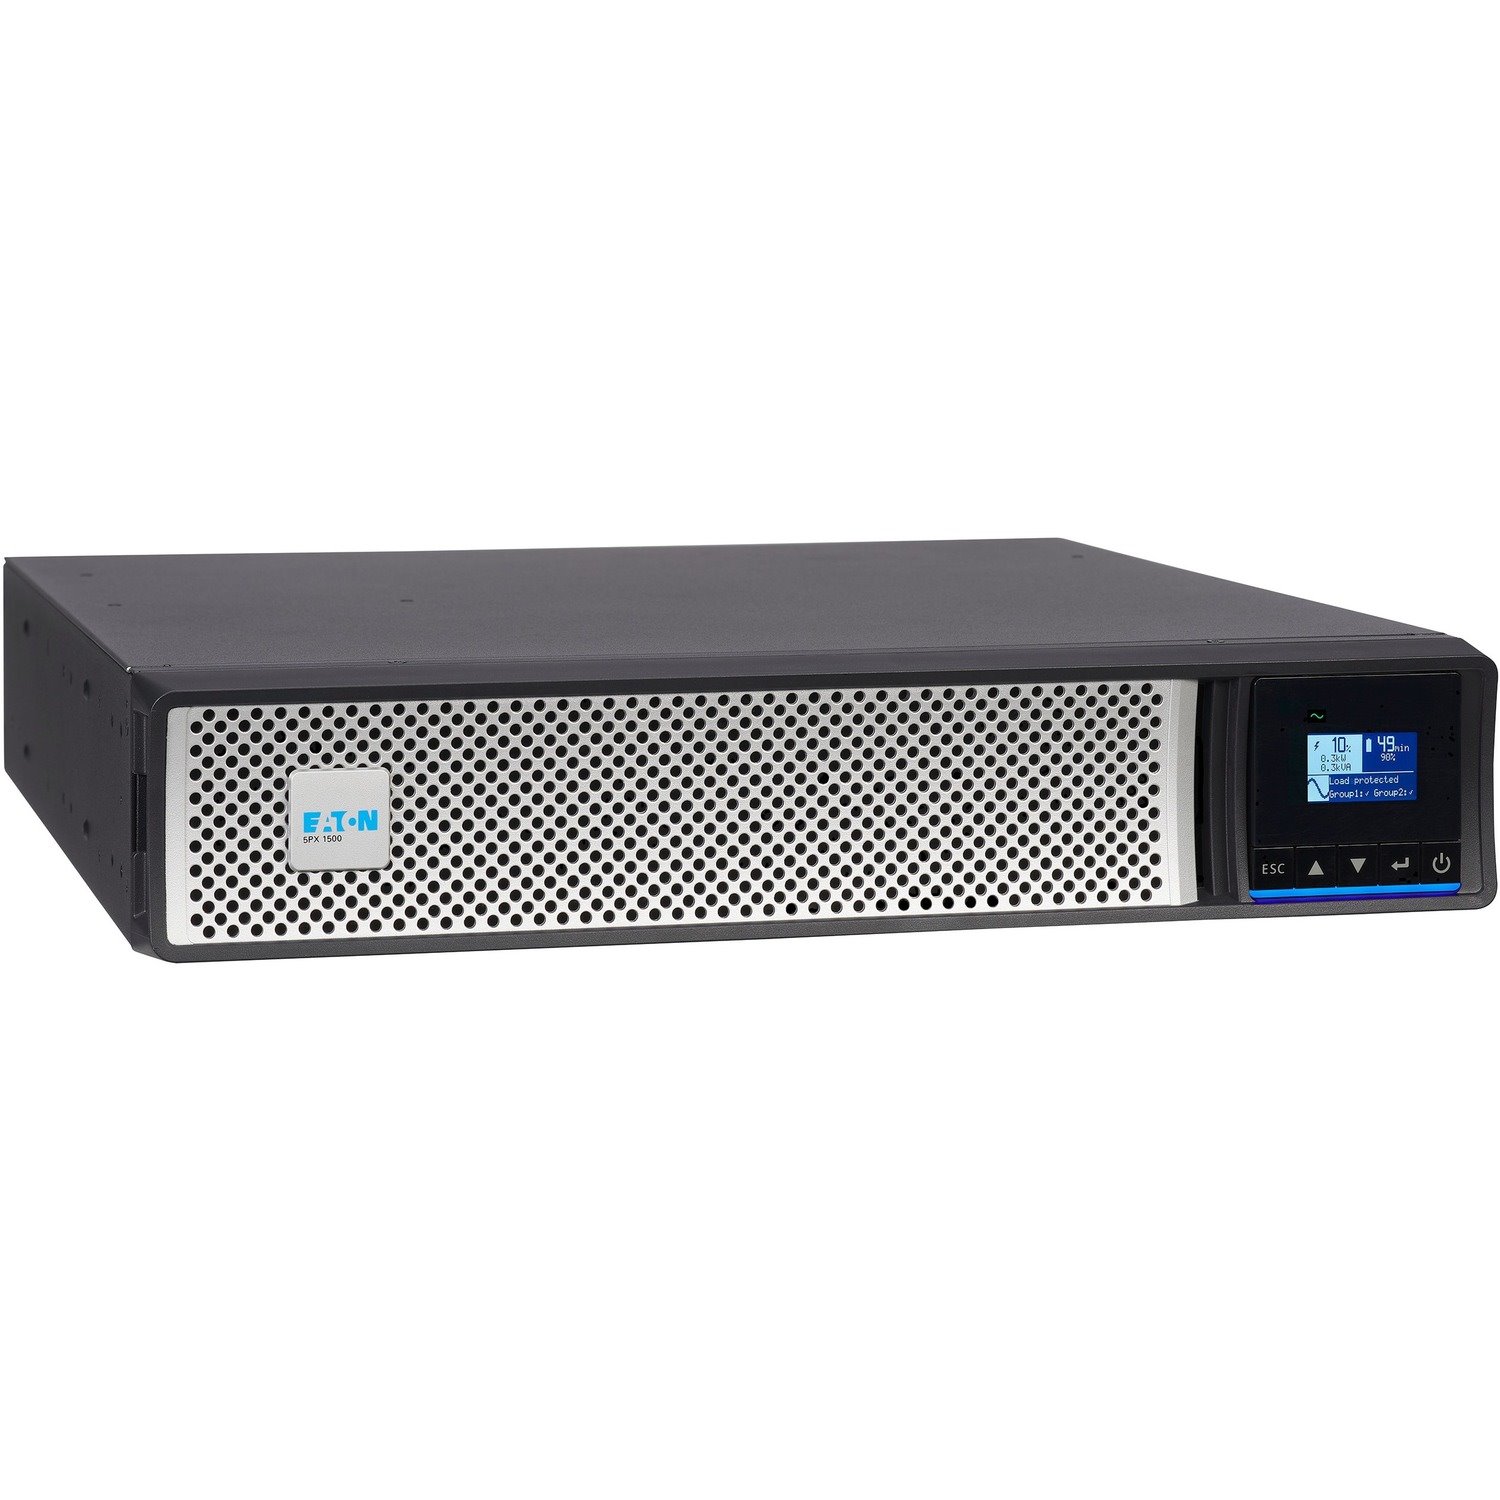 Eaton 5PX G2 1440VA 1440W 120V Line-Interactive UPS - 8 NEMA 5-15R Outlets, Cybersecure Network Card Included, Extended Run, 2U Rack/Tower